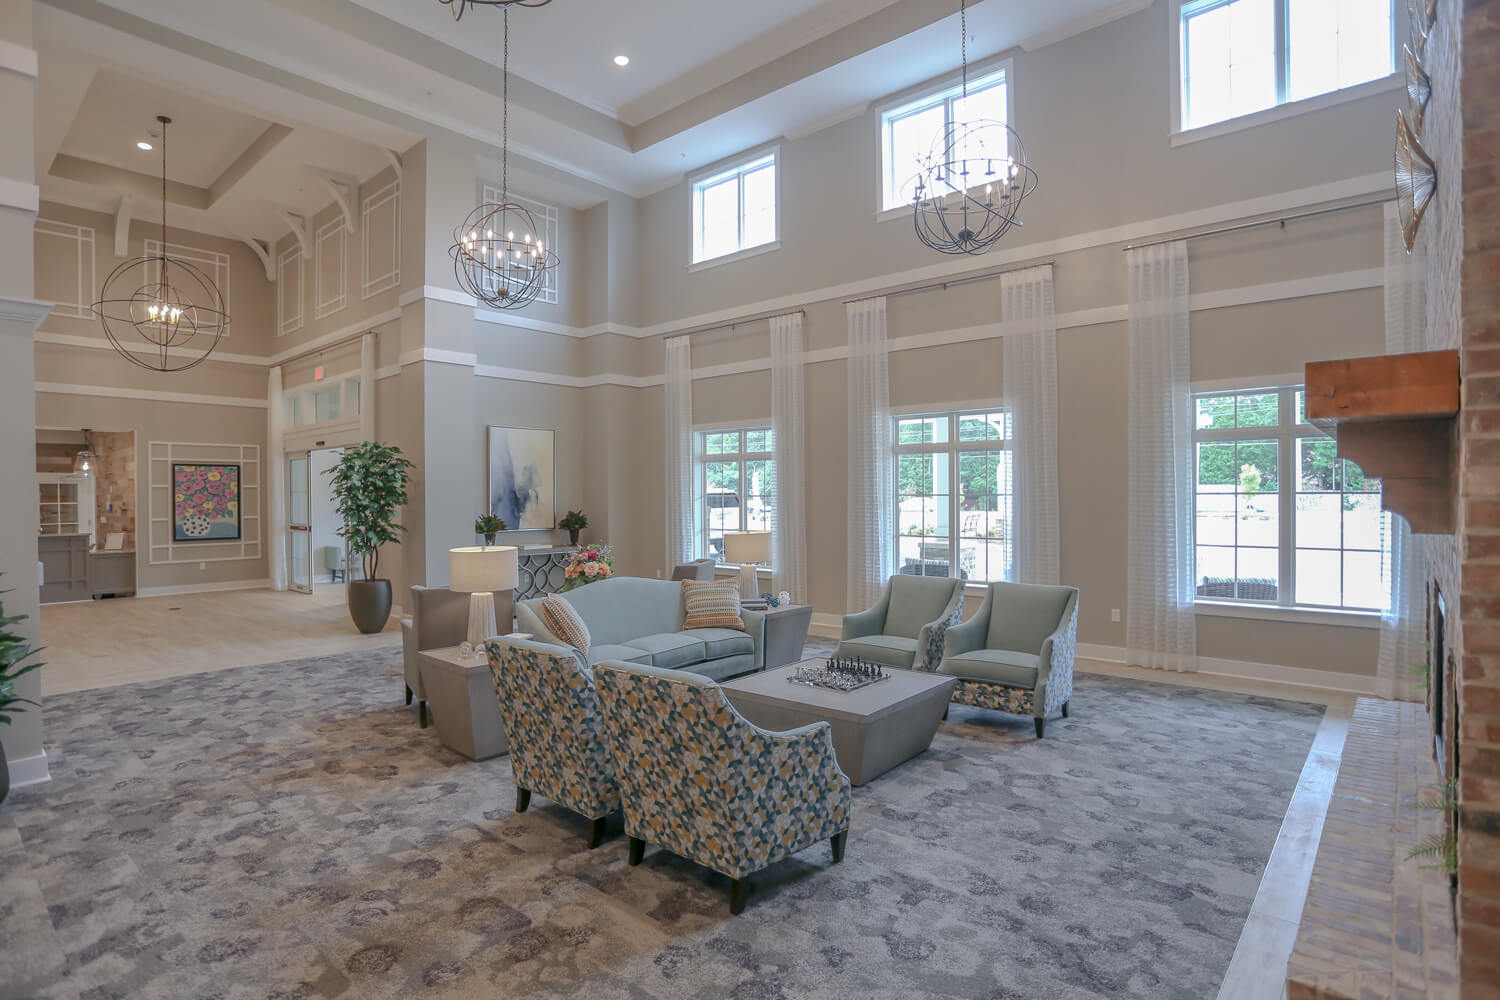 Grand South Senior Living - Large Living Area - Designed by Foshee Architecture